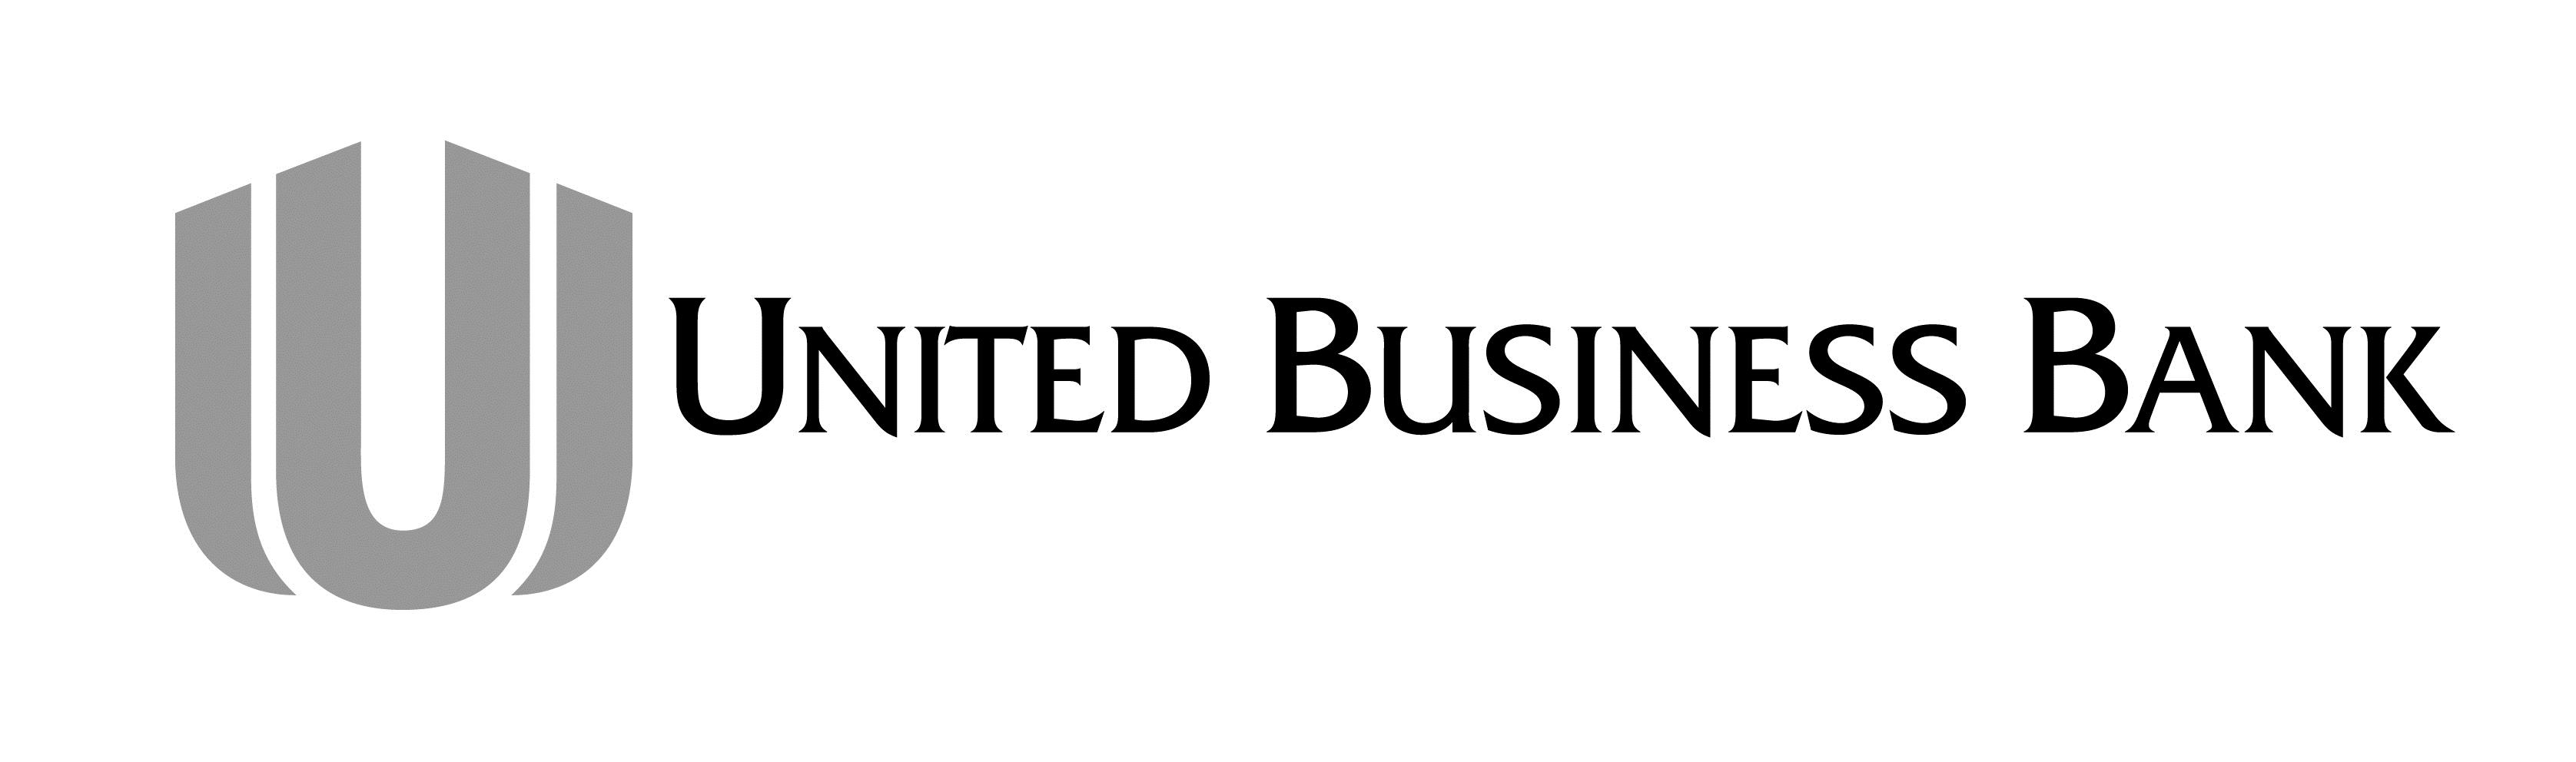 bank united business